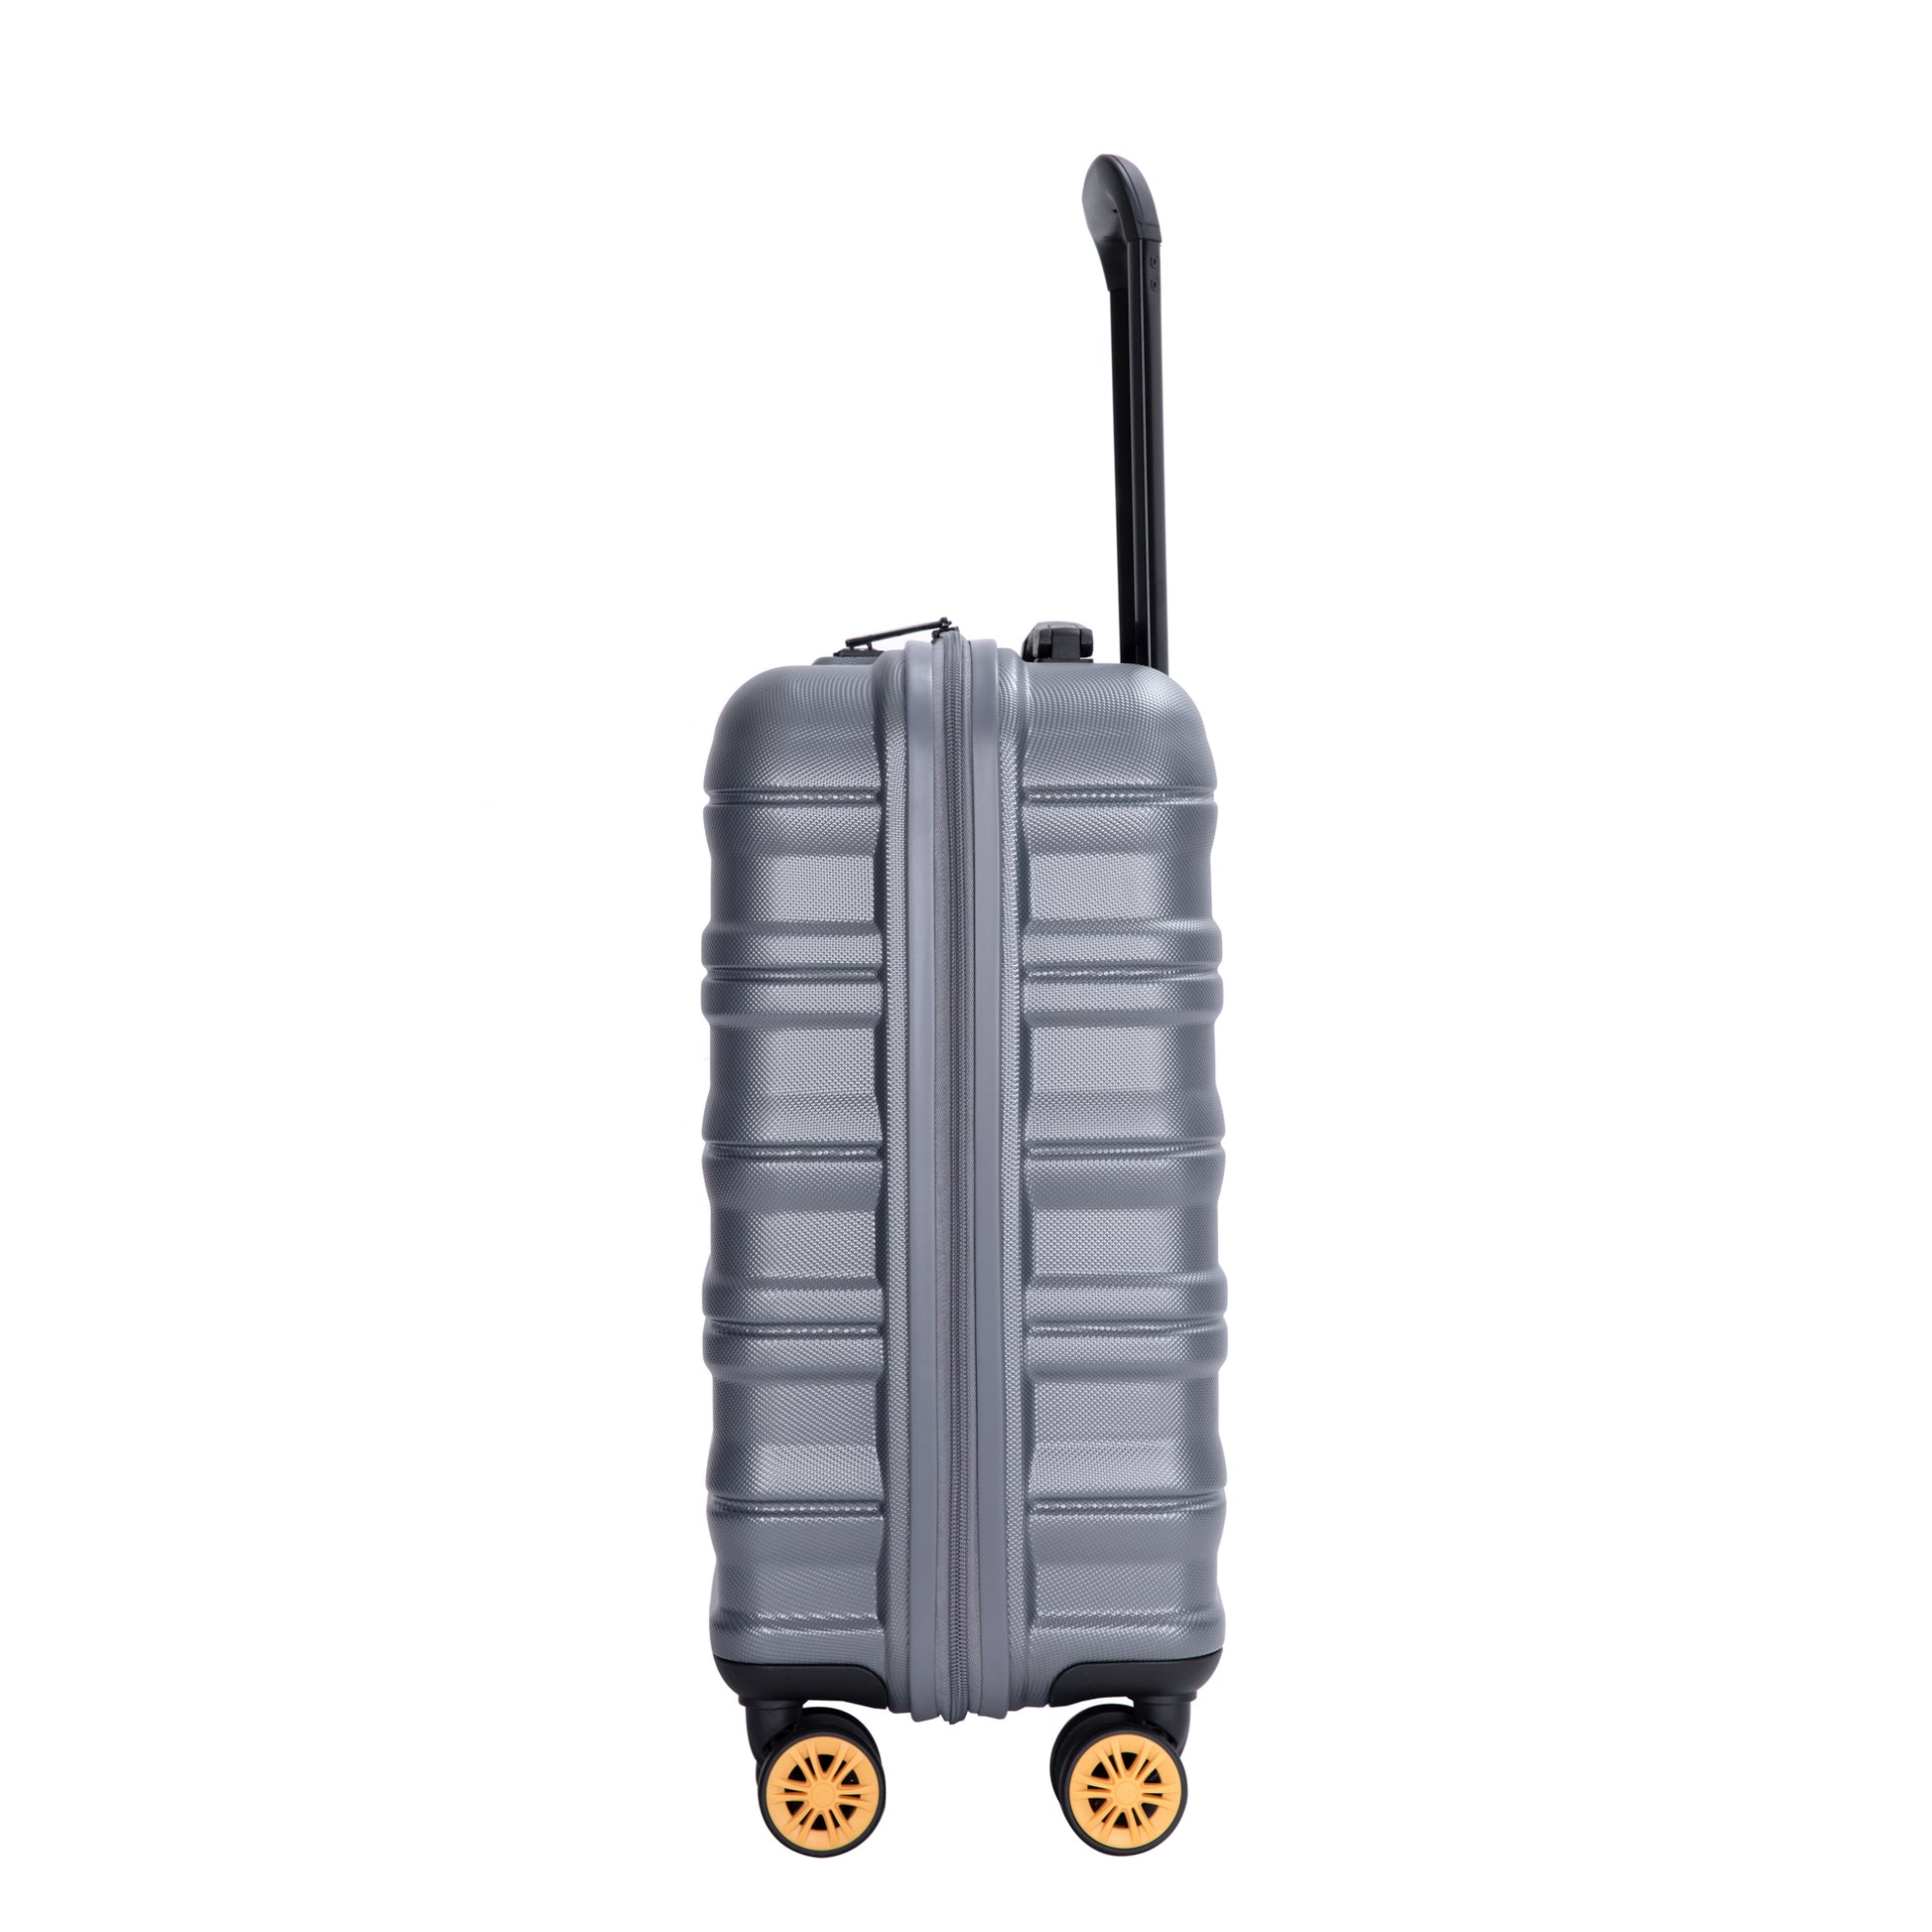 Carry On Luggage Airline Approved18.5" Carry On dark grey-abs+pc